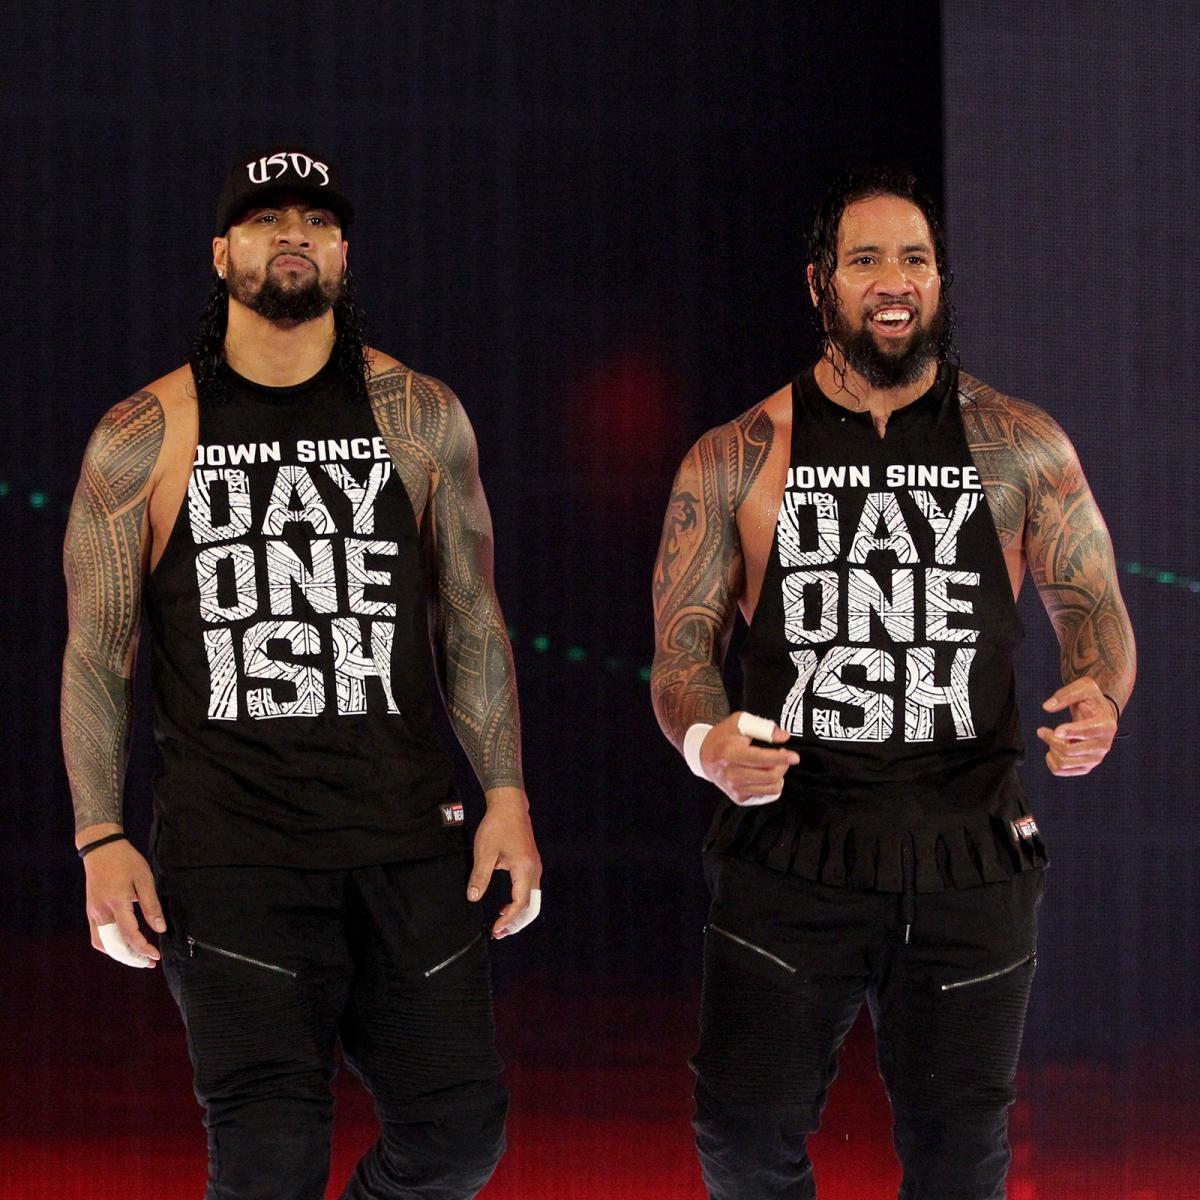 The New Day vs. The Usos